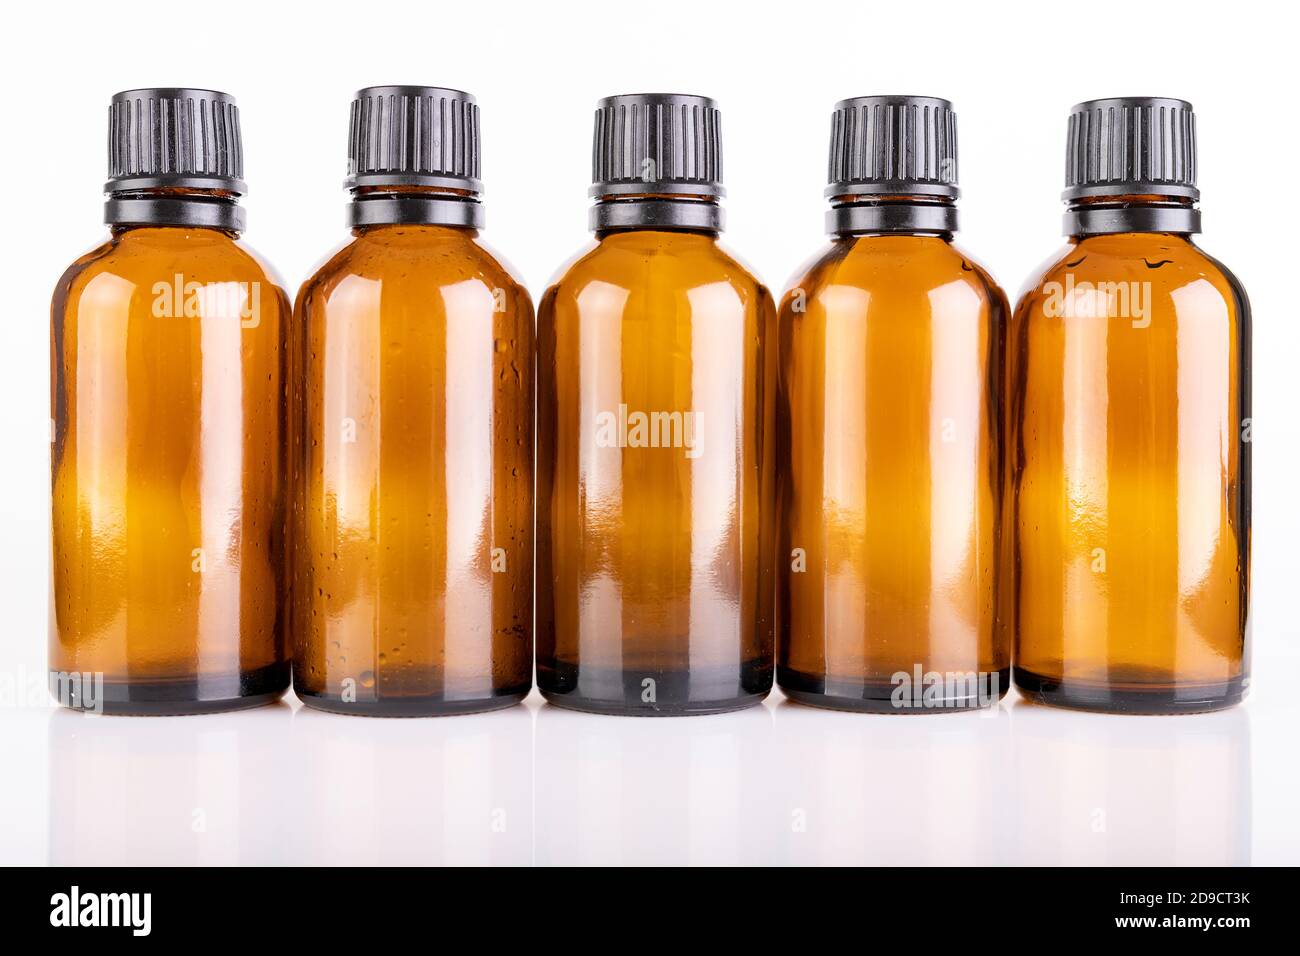 https://c8.alamy.com/comp/2D9CT3K/small-glass-bottles-for-the-storage-of-light-sensitive-liquids-containers-used-in-pharmaceuticals-light-background-2D9CT3K.jpg